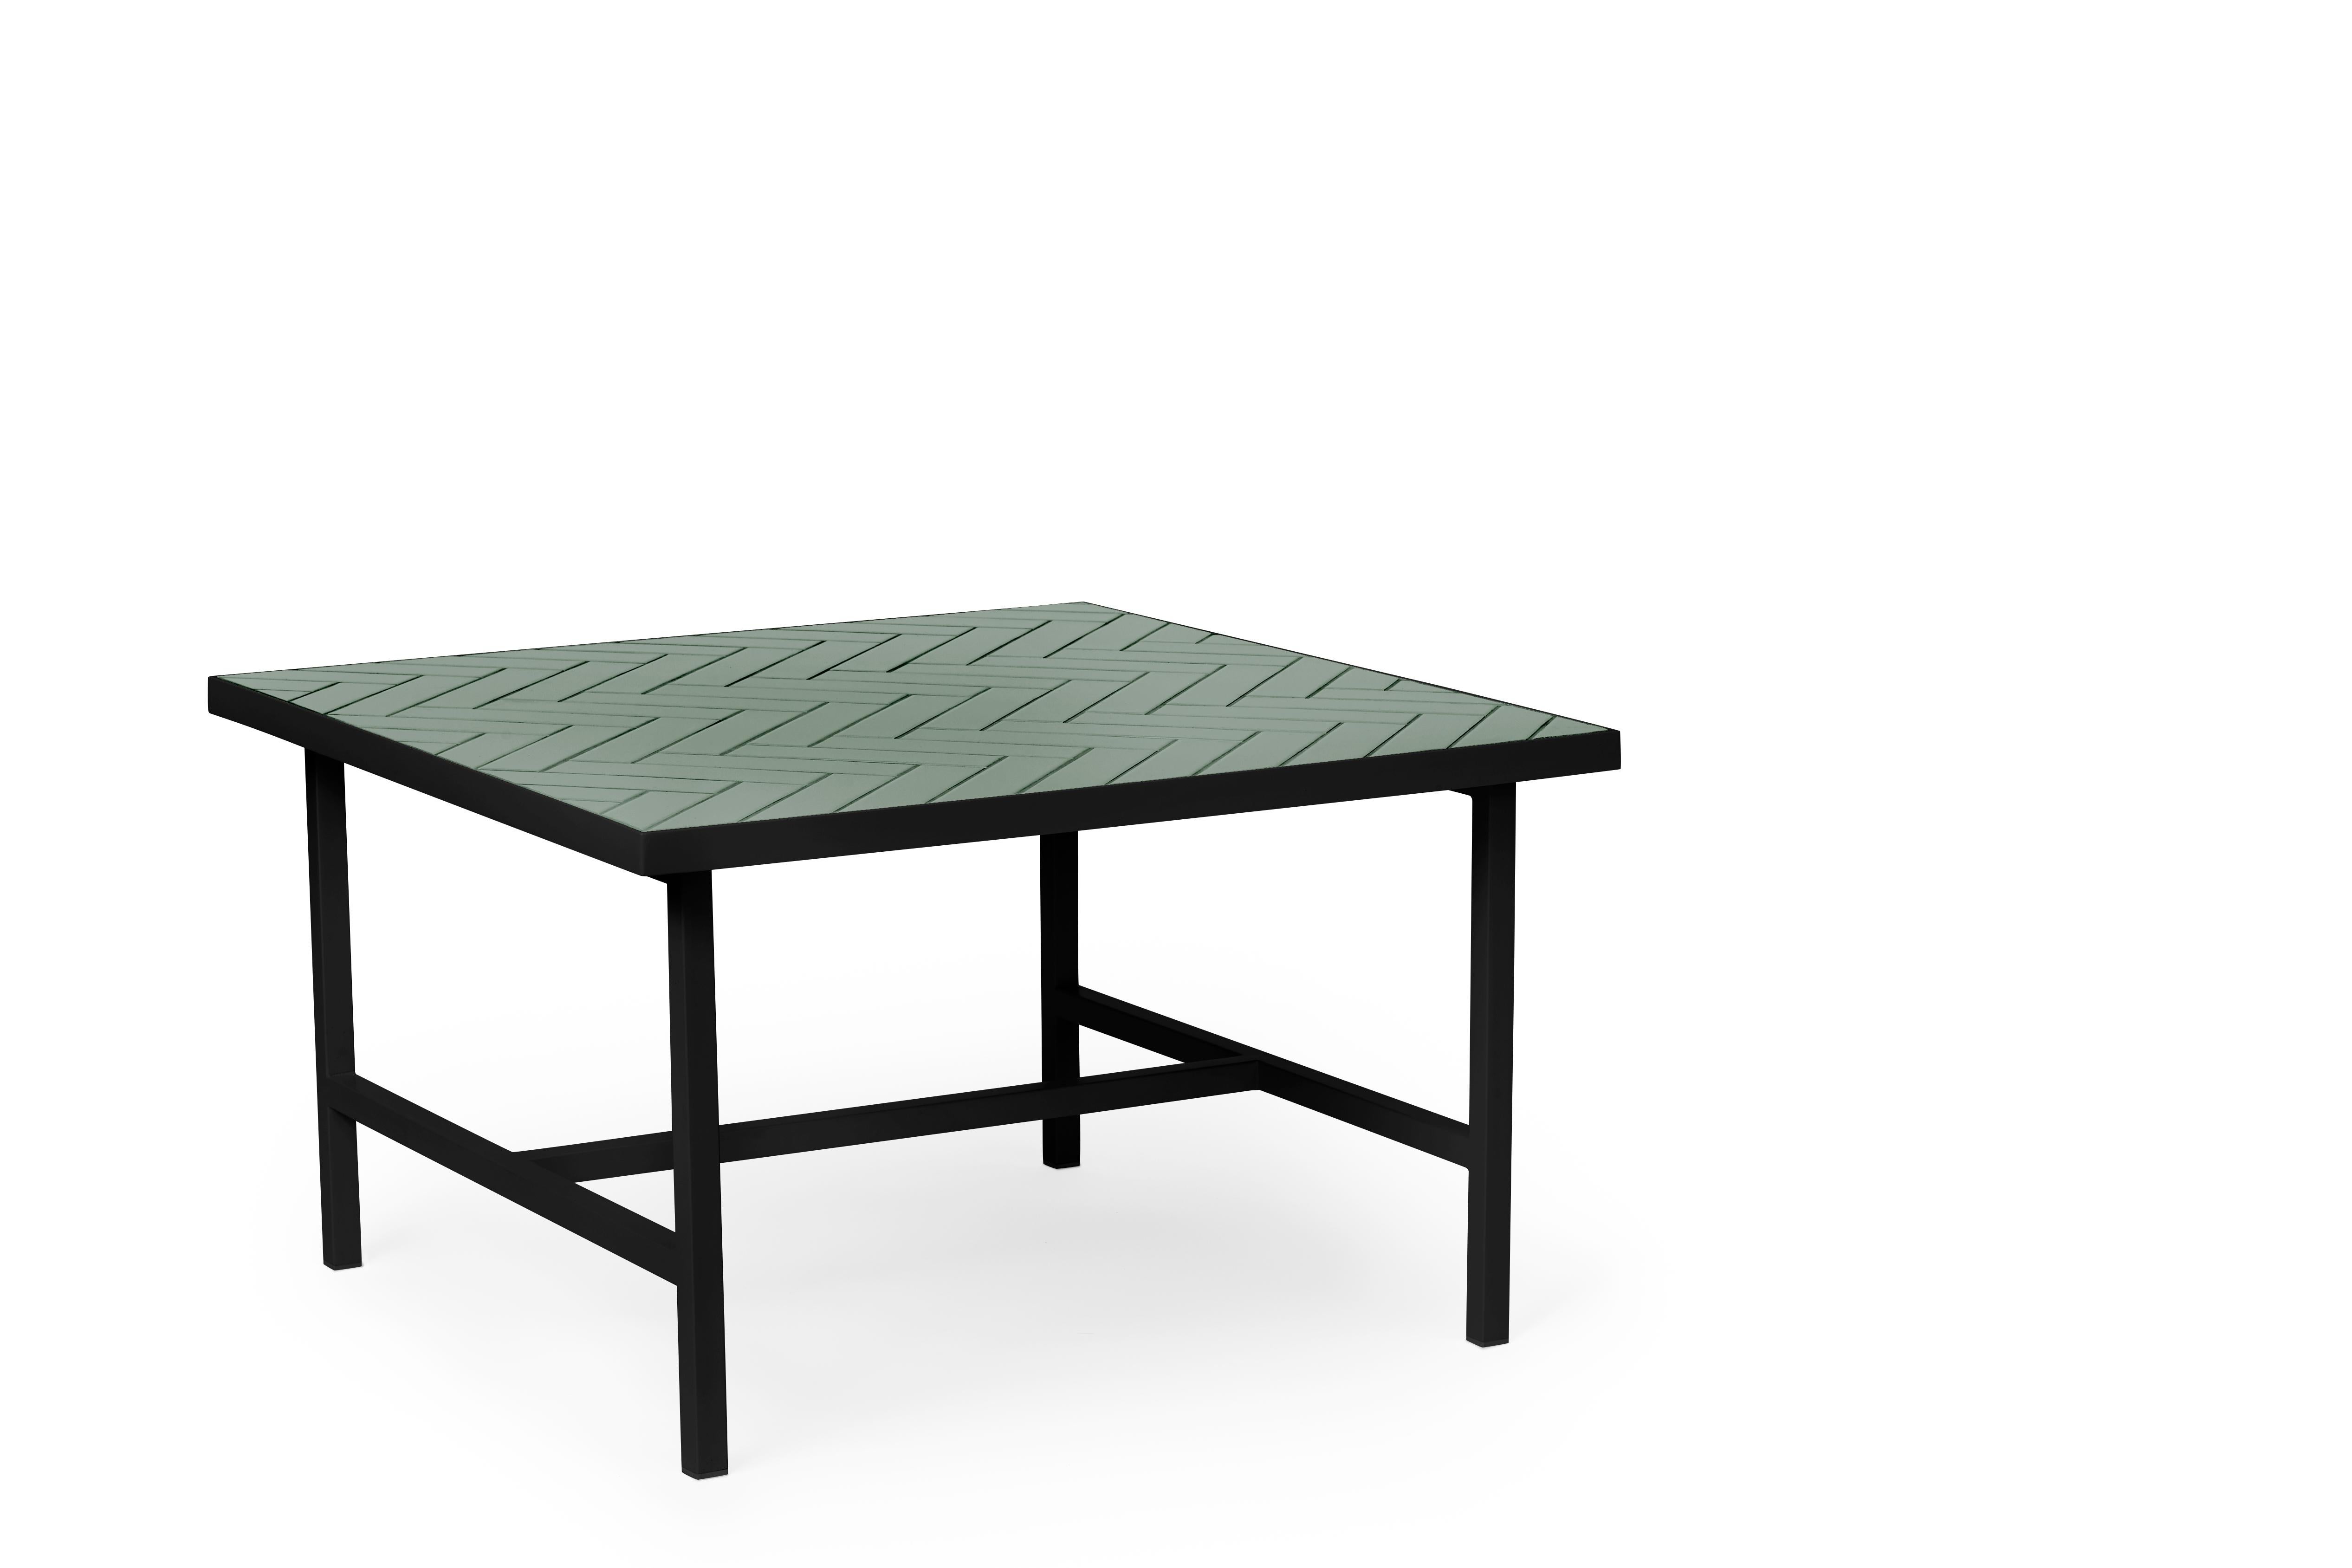 For Sale: Green (Forest green) Herringbone Coffee Table, by Charlotte Høncke from Warm Nordic 2